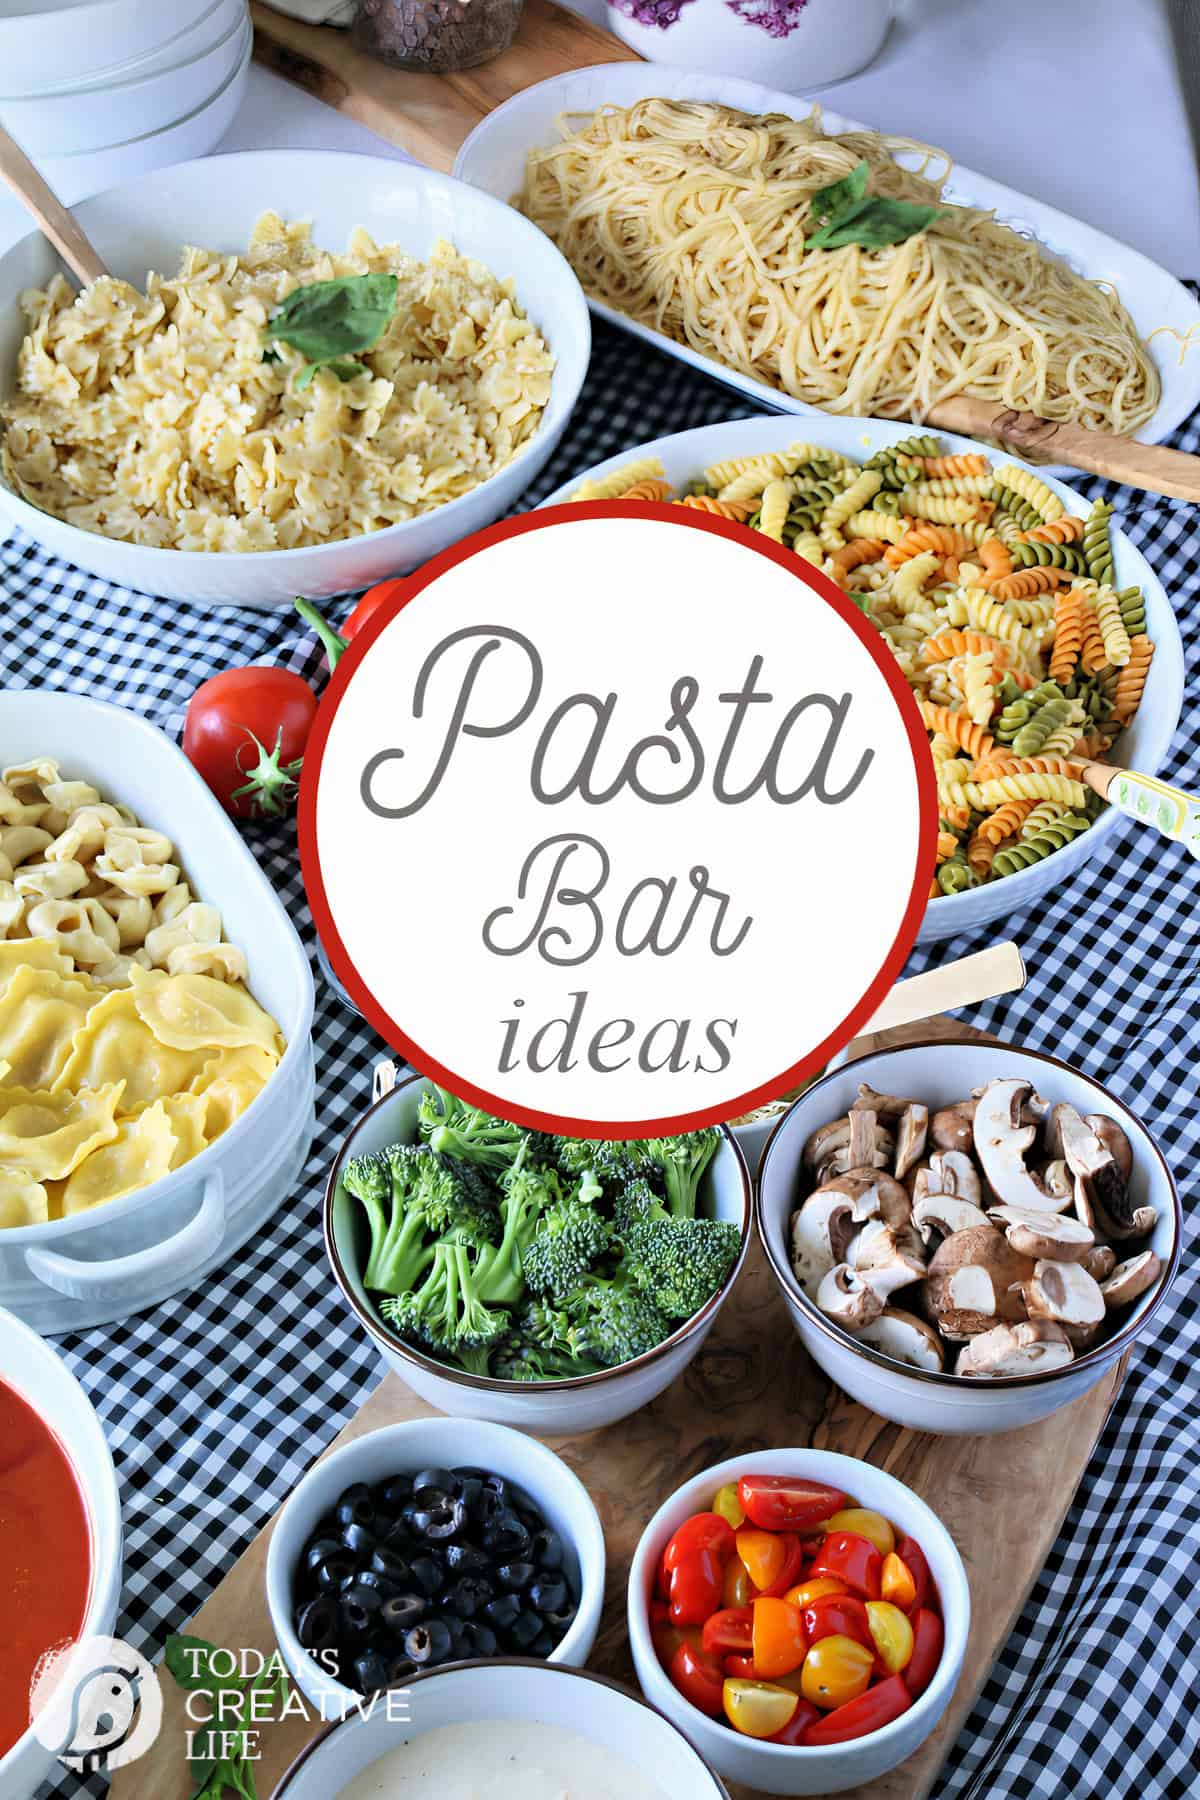 How to Host a Pasta Bar